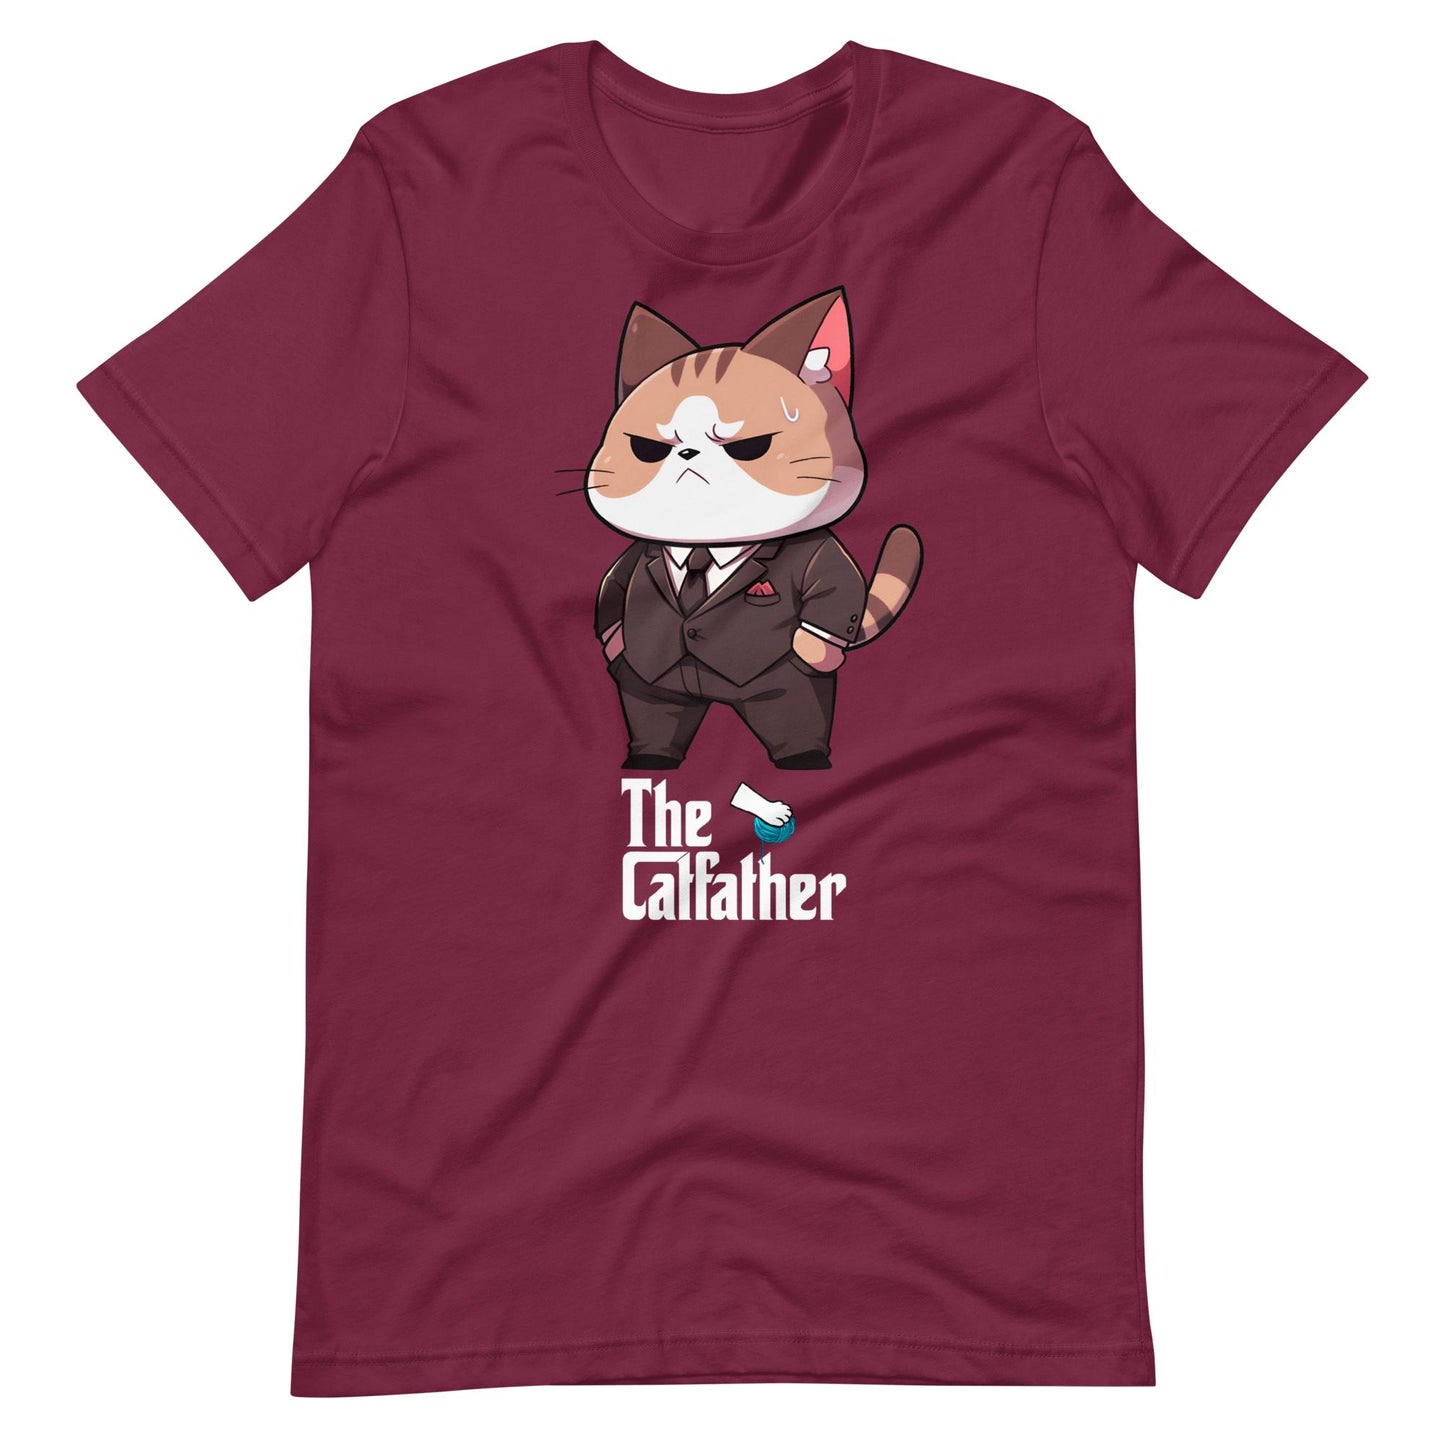 The Catfather T-Shirt